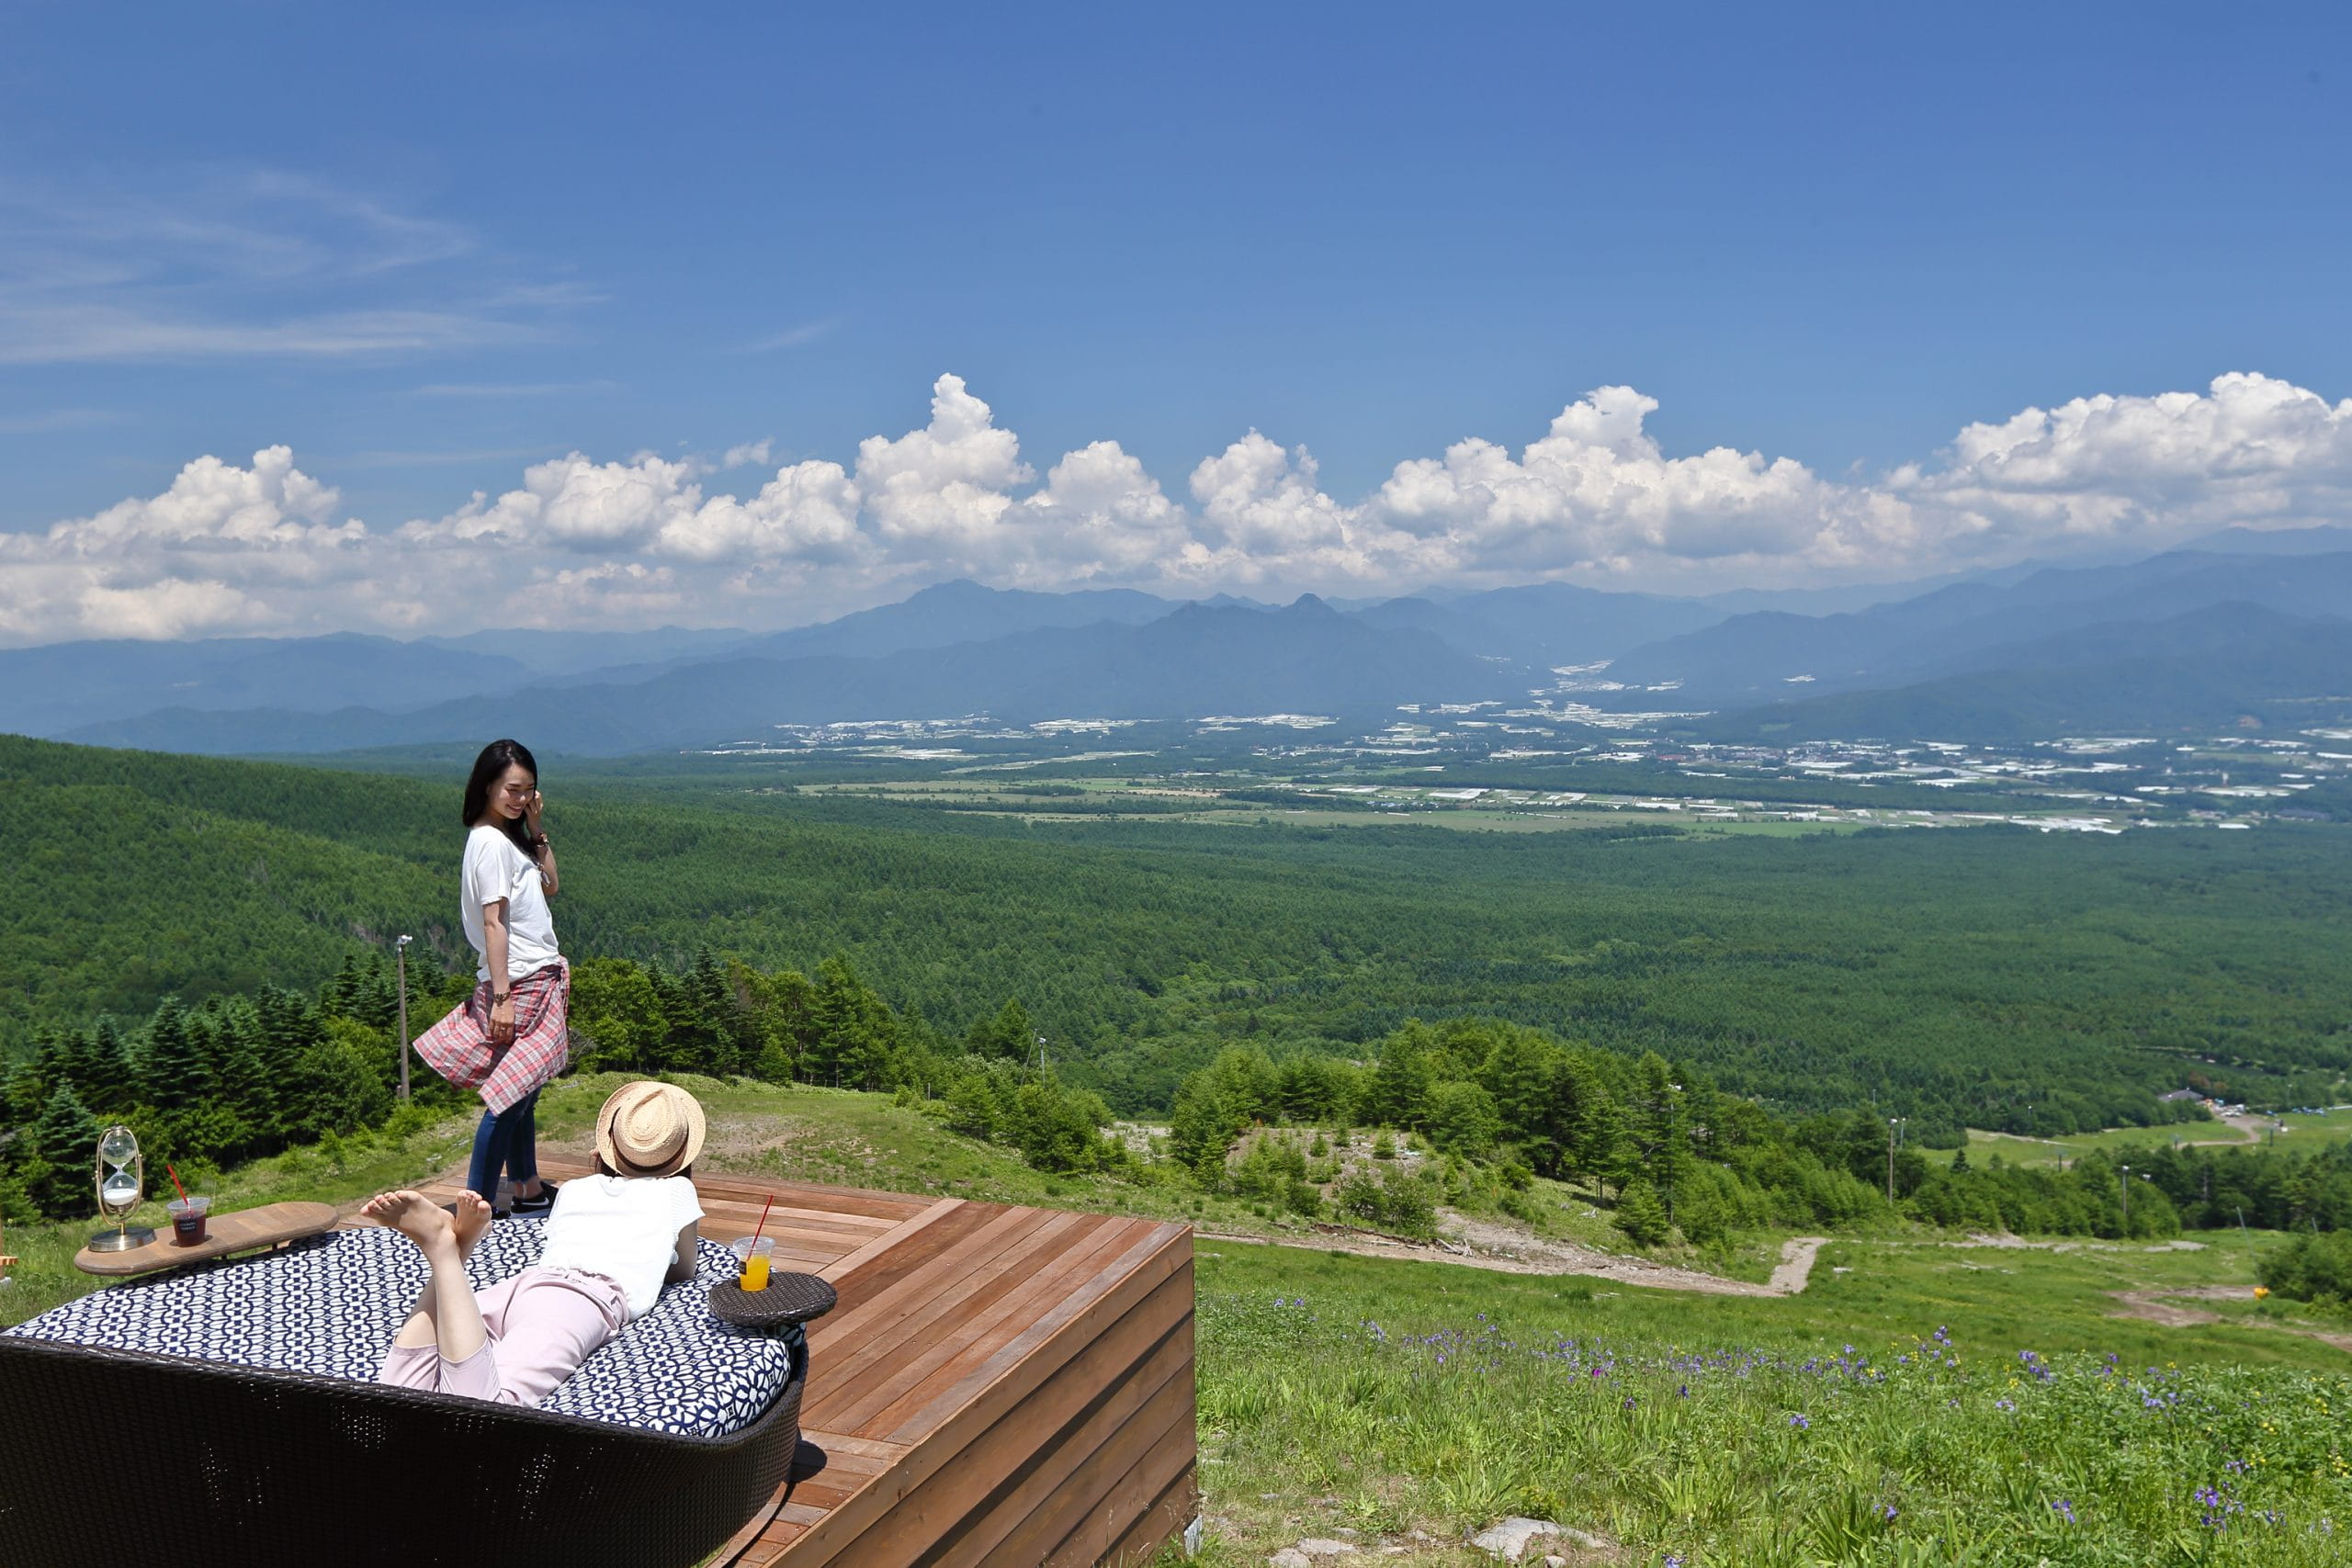 Stay above it all at Kiyosato Terrace, a cool, natural escape from the heat and hustle and bustle of Tokyo.